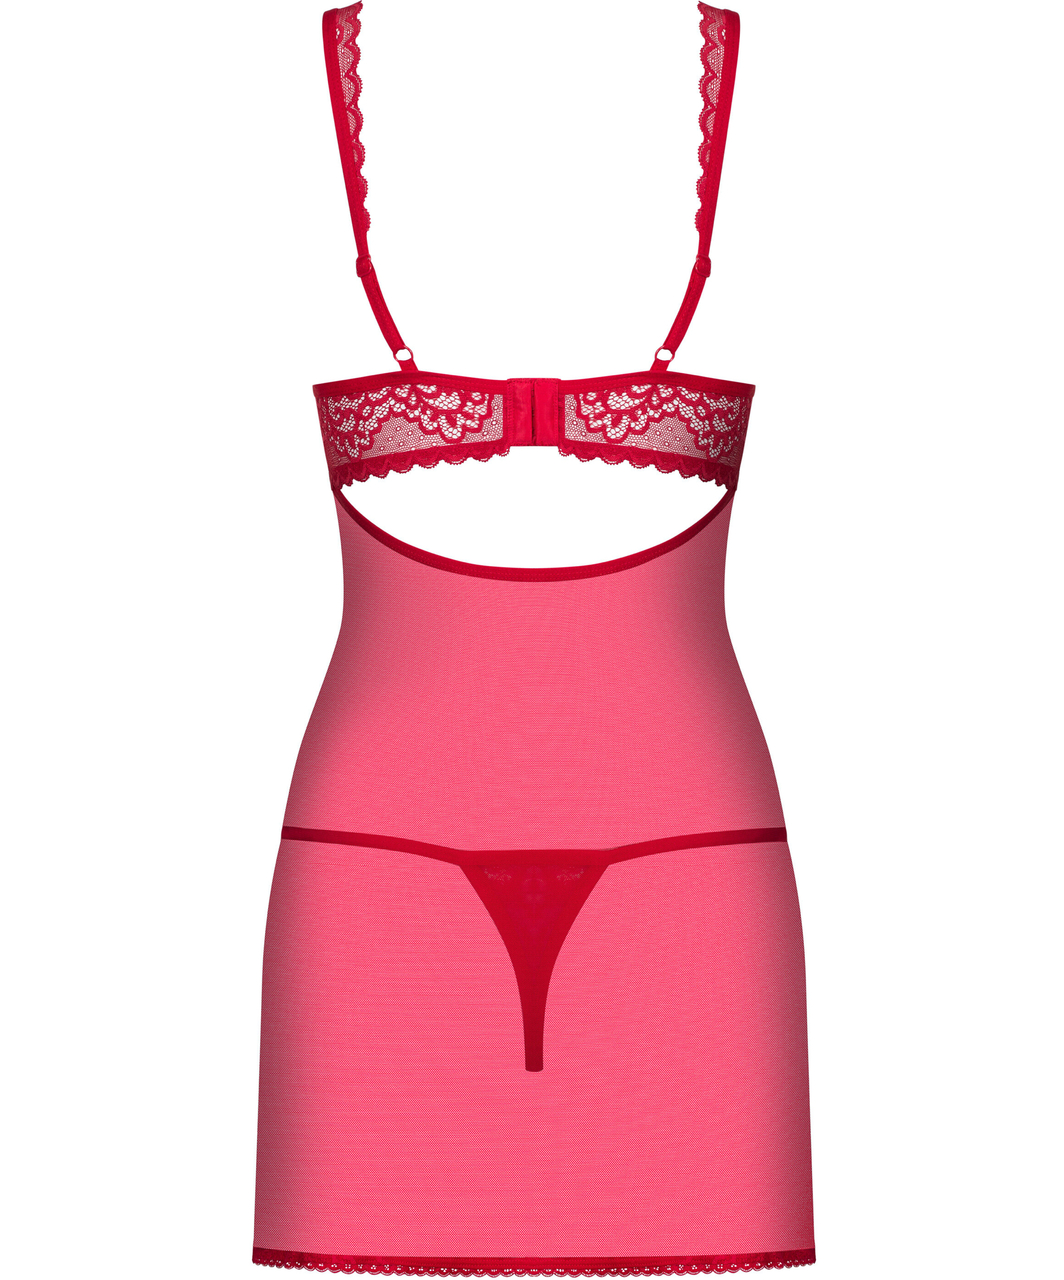 Obsessive red mesh chemise with lace inserts